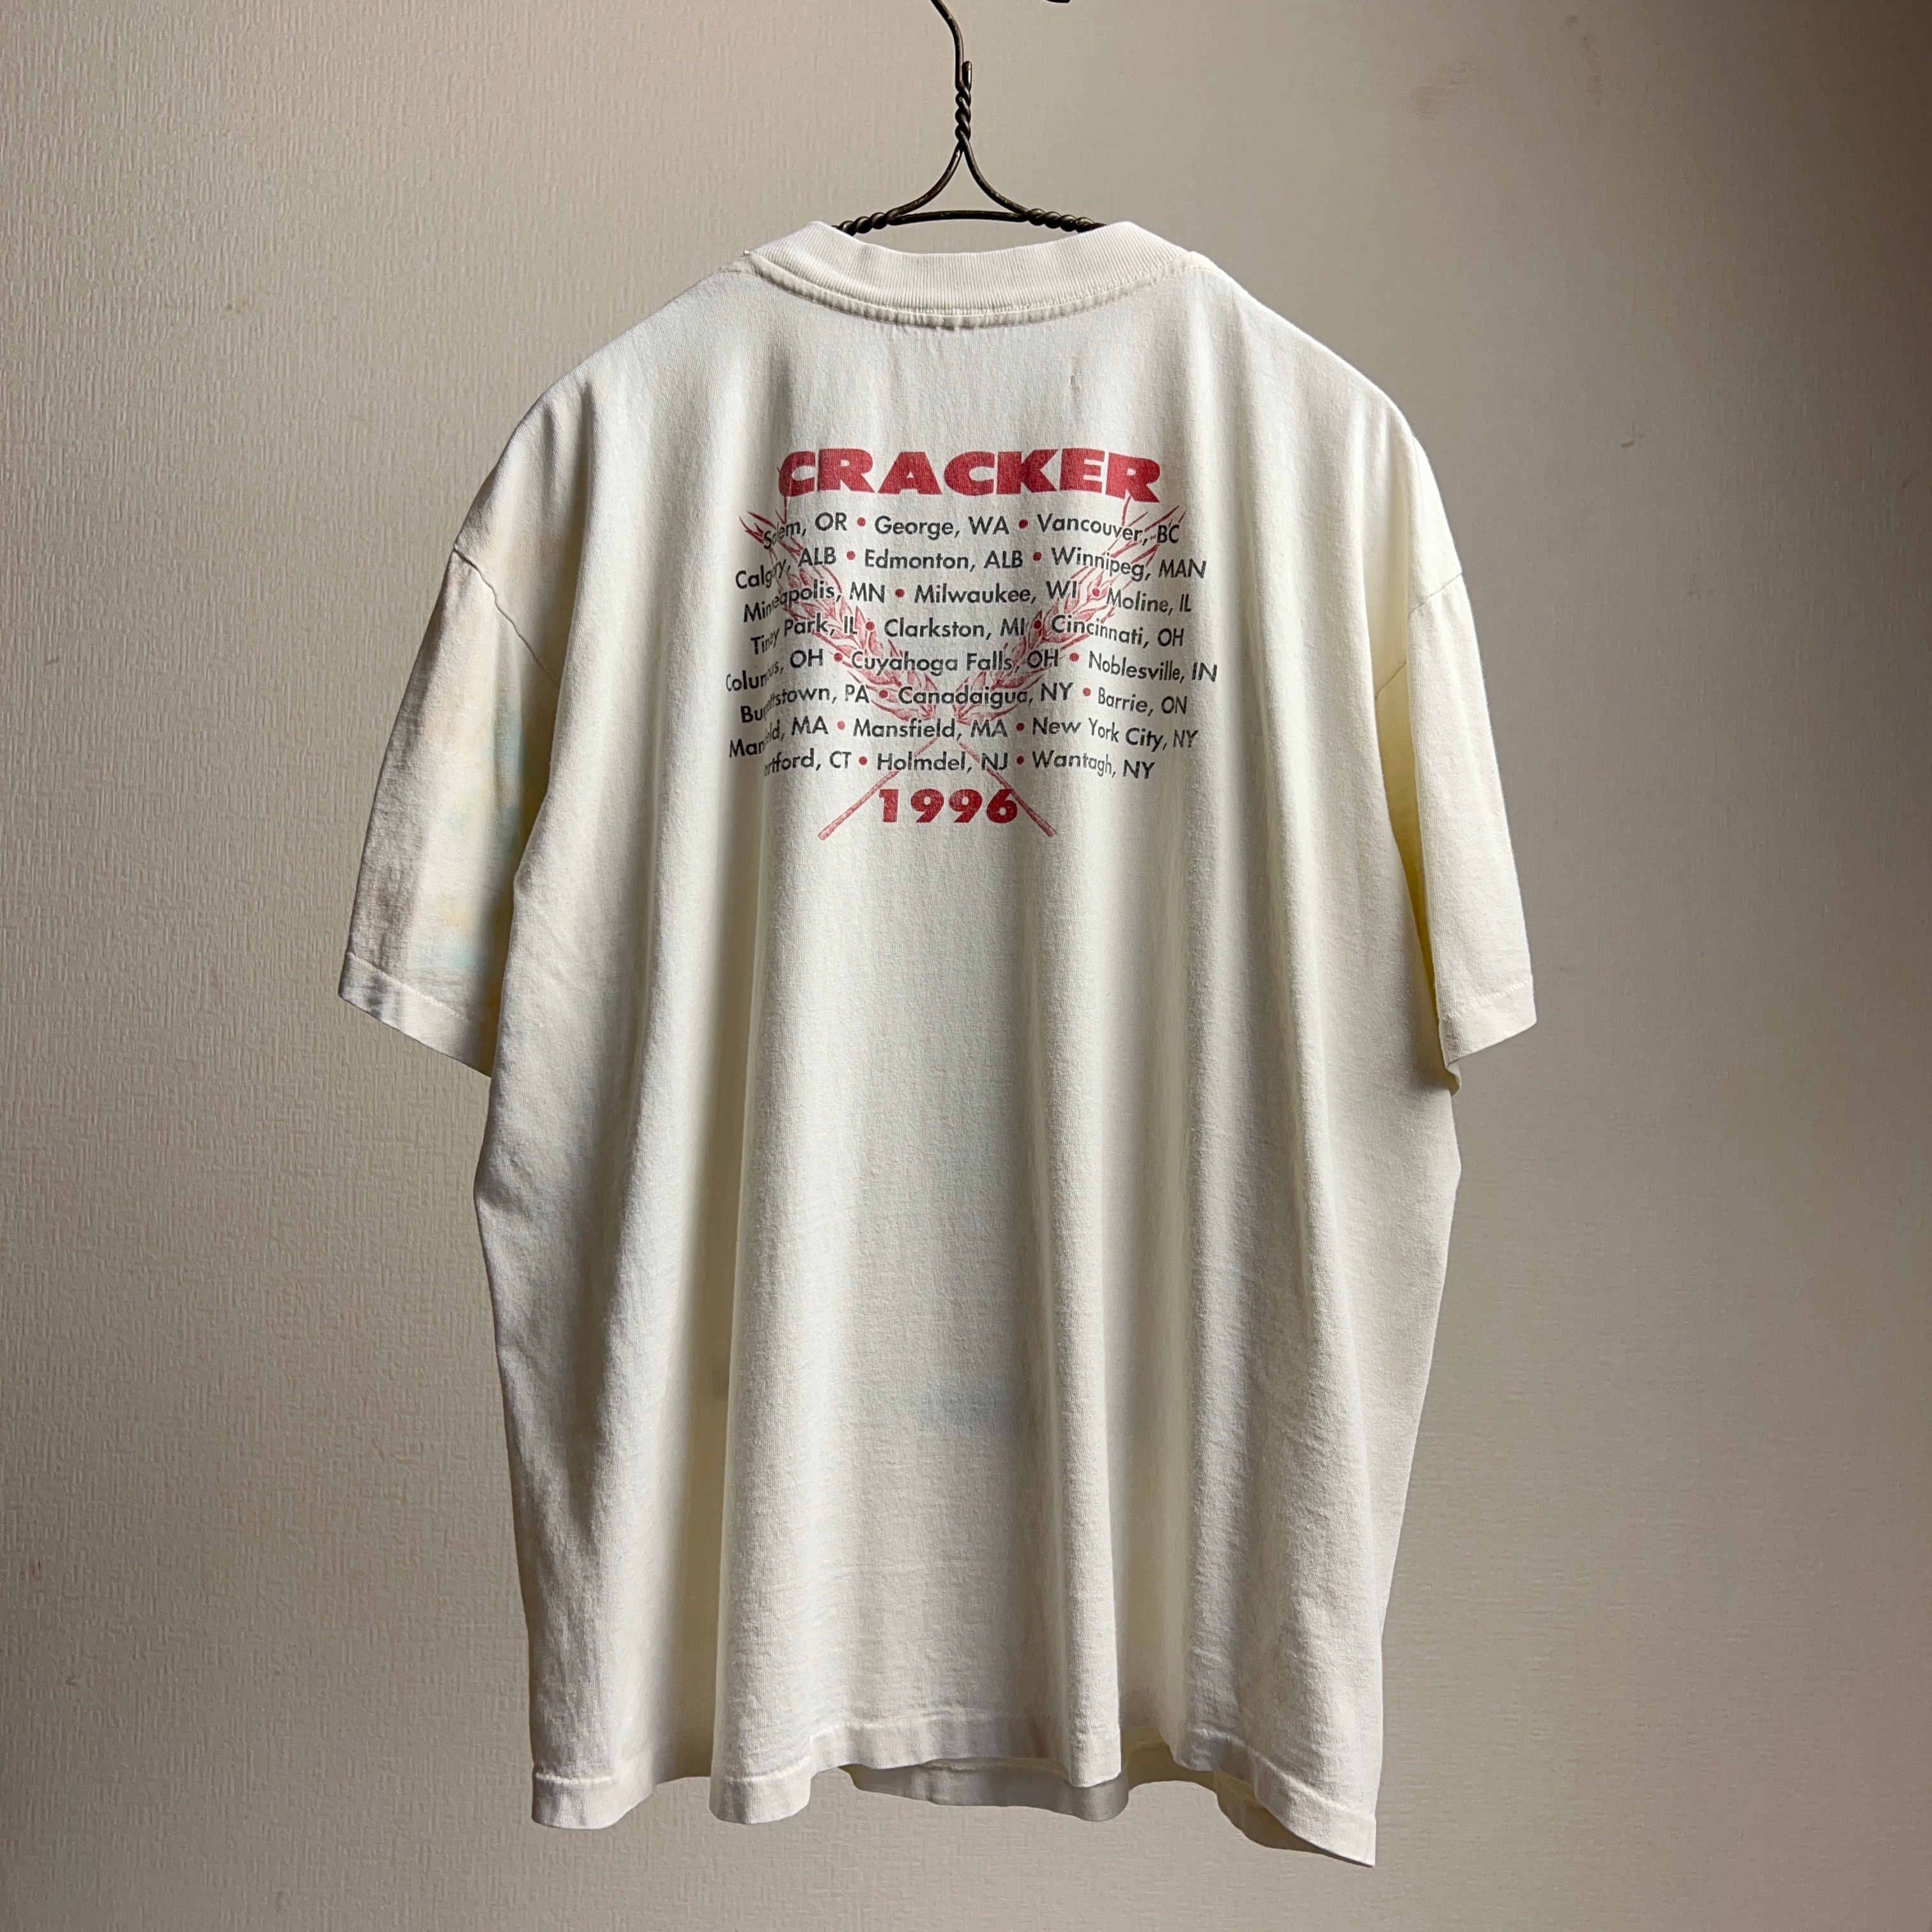 's "CRACKER" The golden age Band Tshirt A送料無料